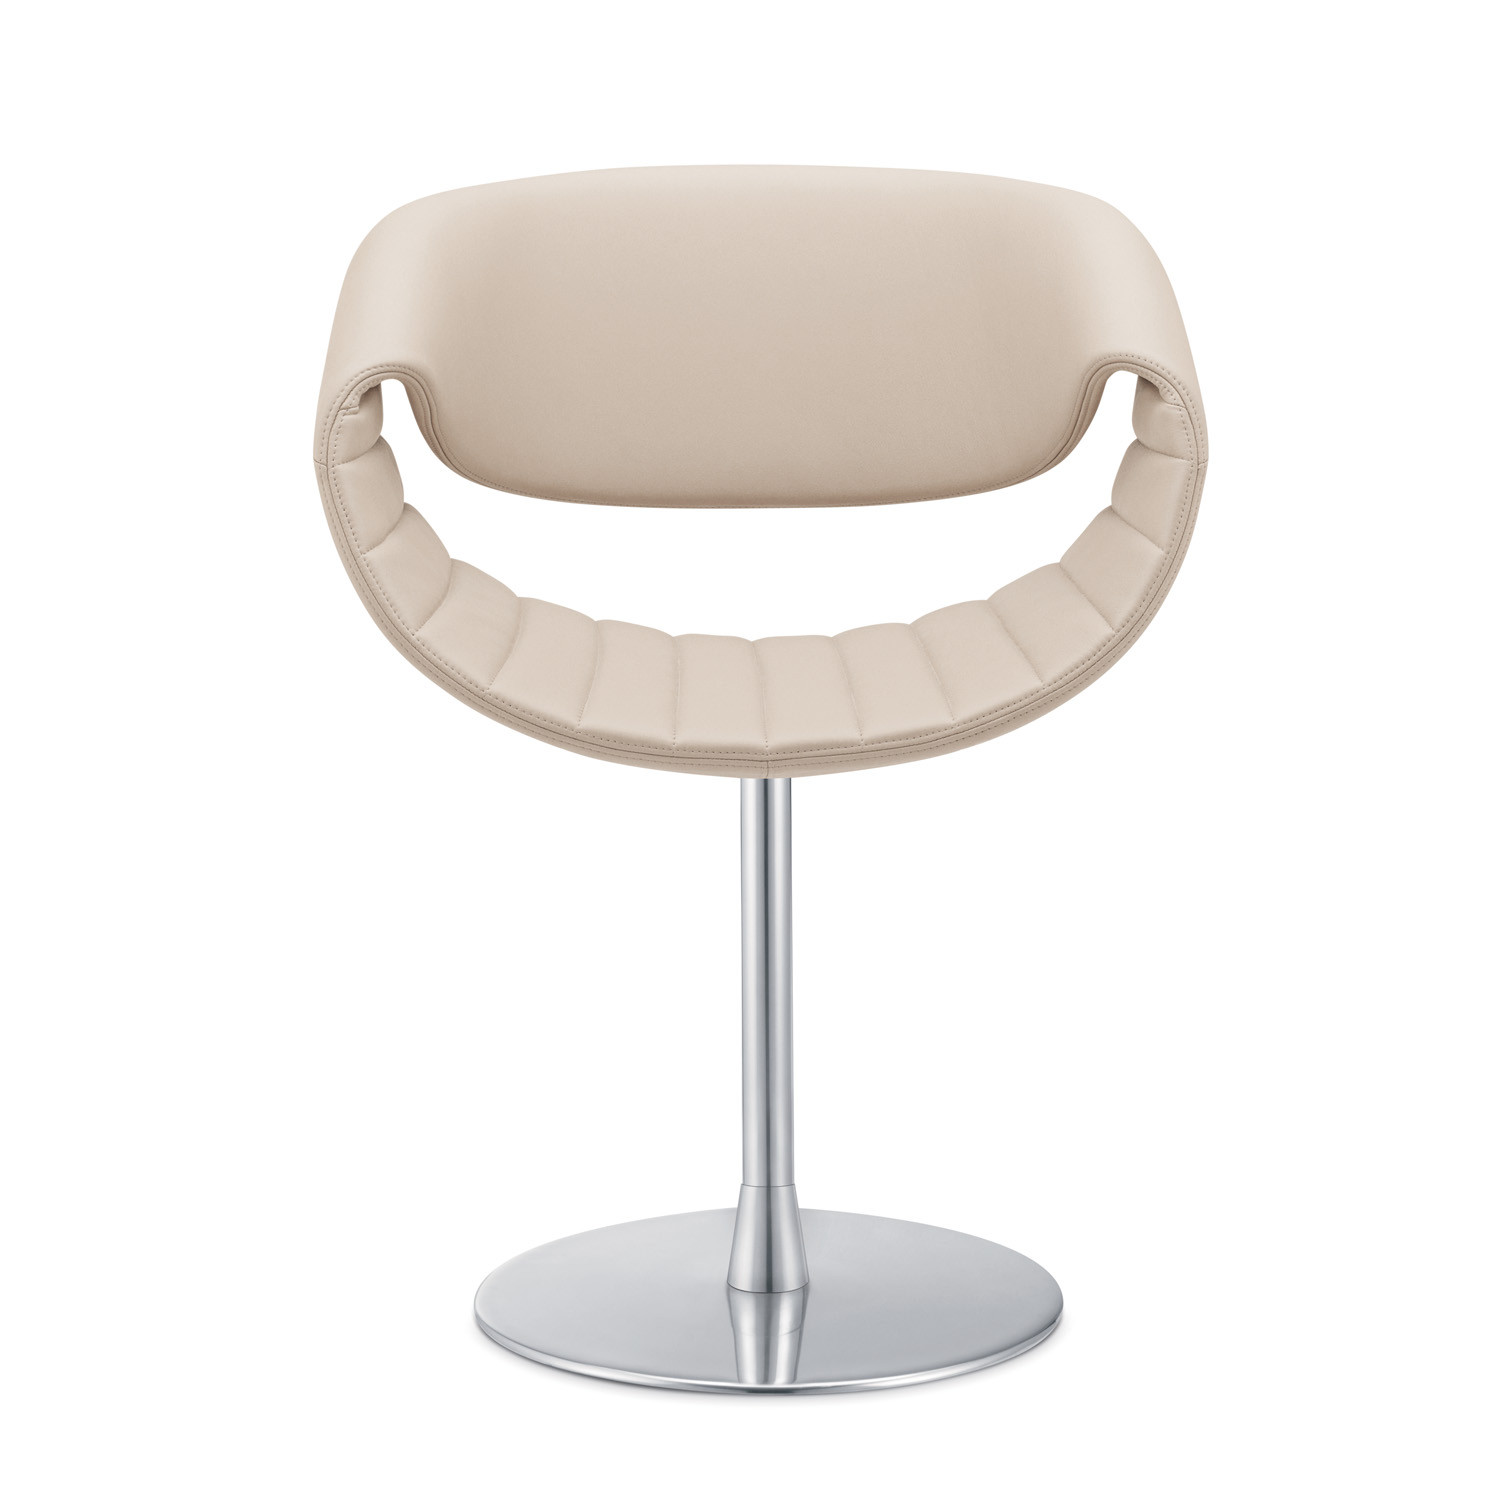 Little Perillo circular base leather upholstered